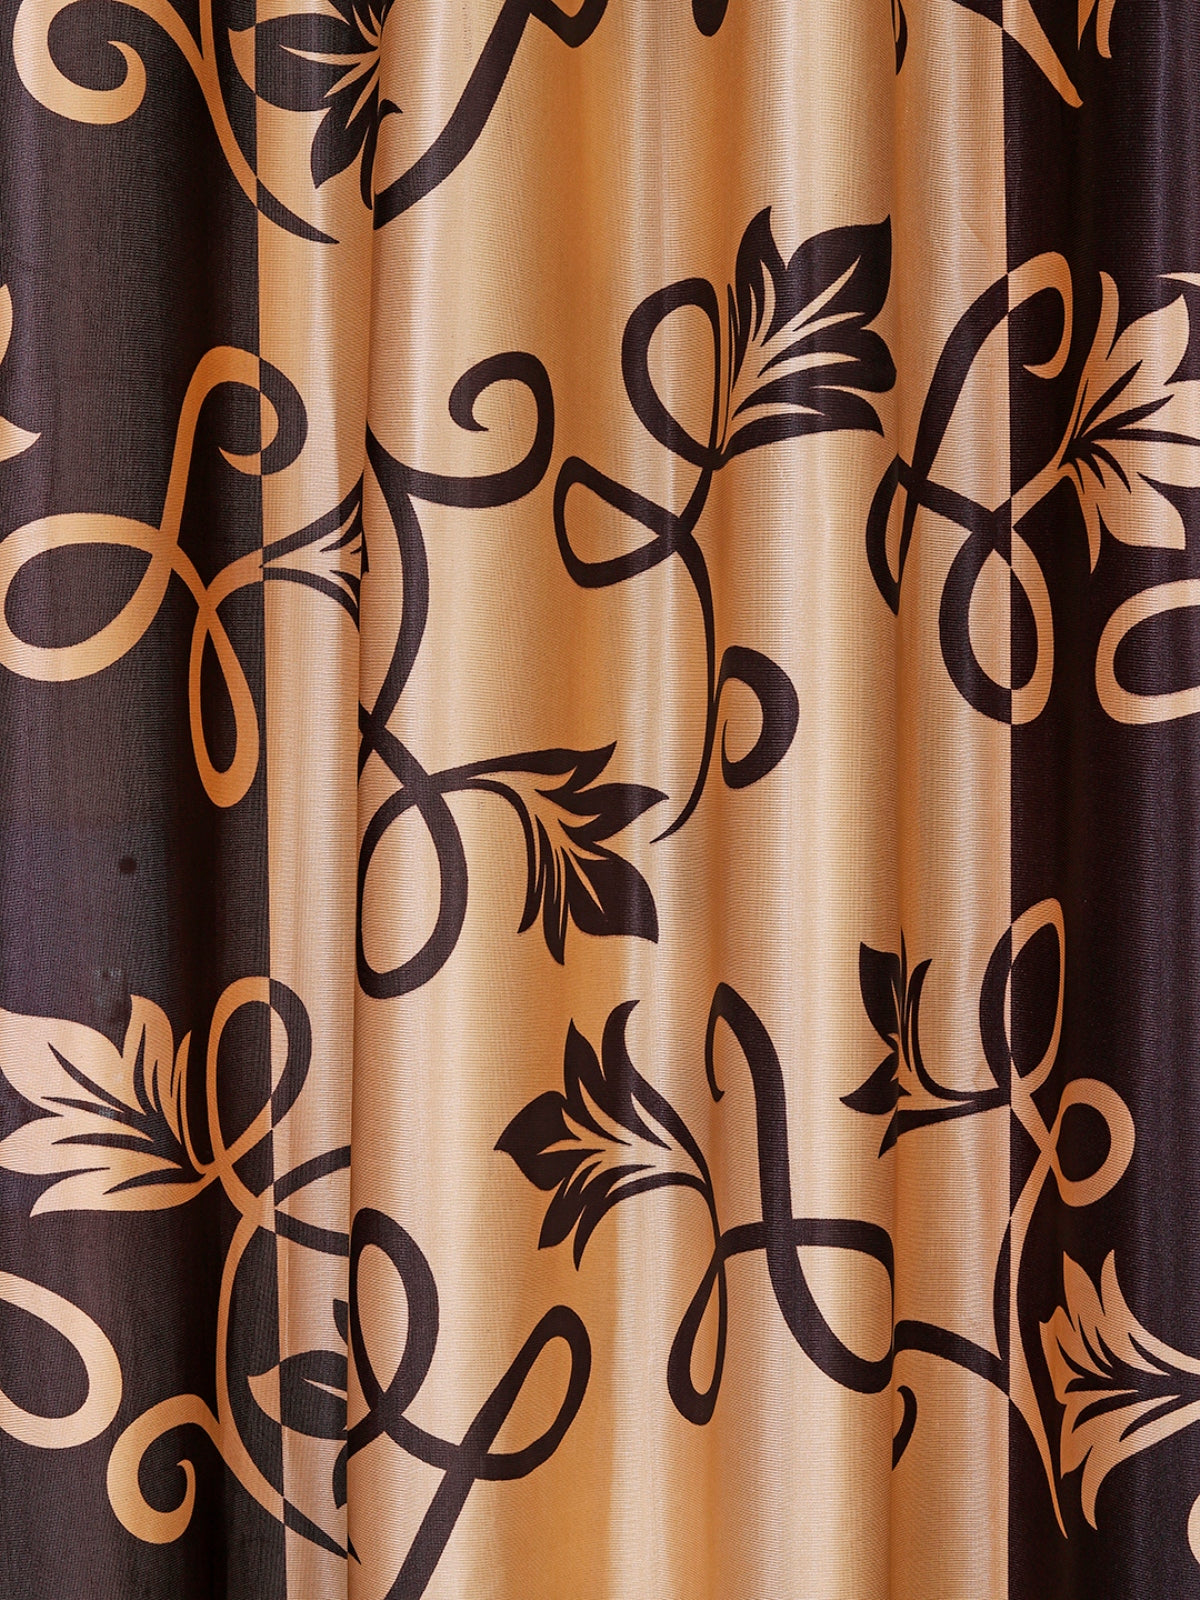 Romee Gold & Brown Floral Patterned Set of 2 Window Curtains